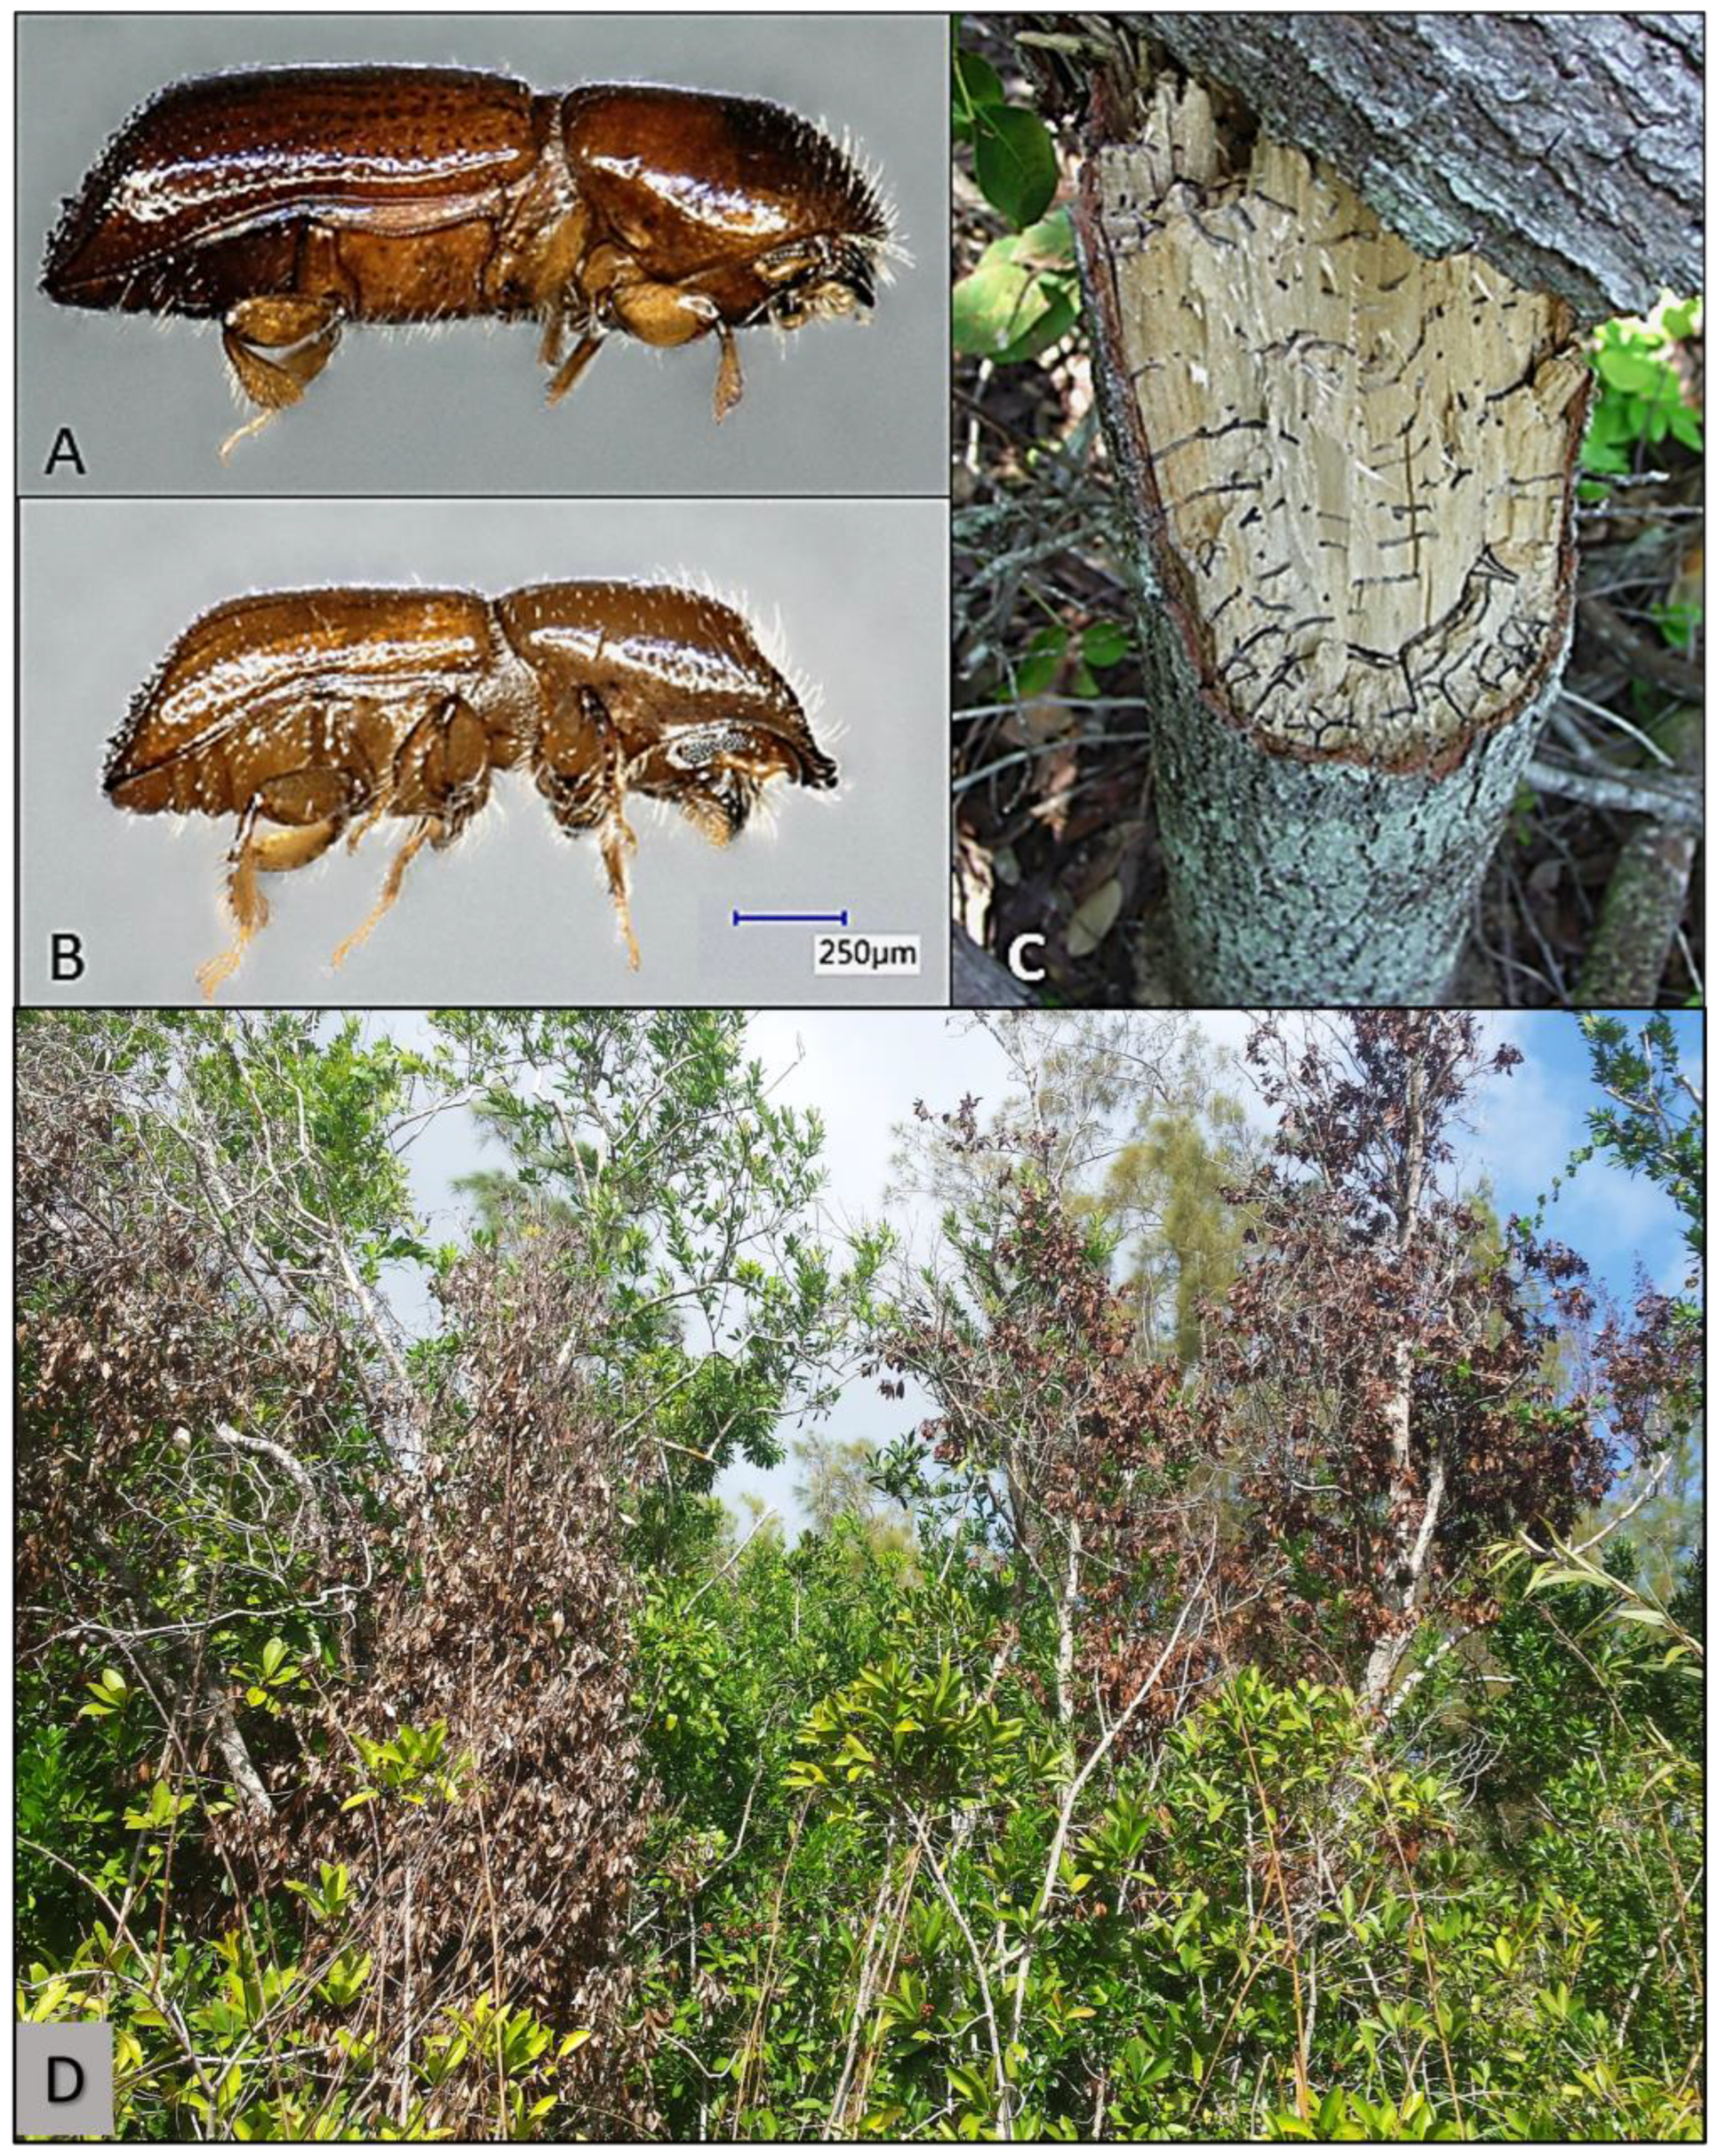 Plants Free Full-Text A New Repellent for Redbay Ambrosia Beetle (Coleoptera Curculionidae Scolytinae), Primary Vector of the Mycopathogen That Causes Laurel Wilt